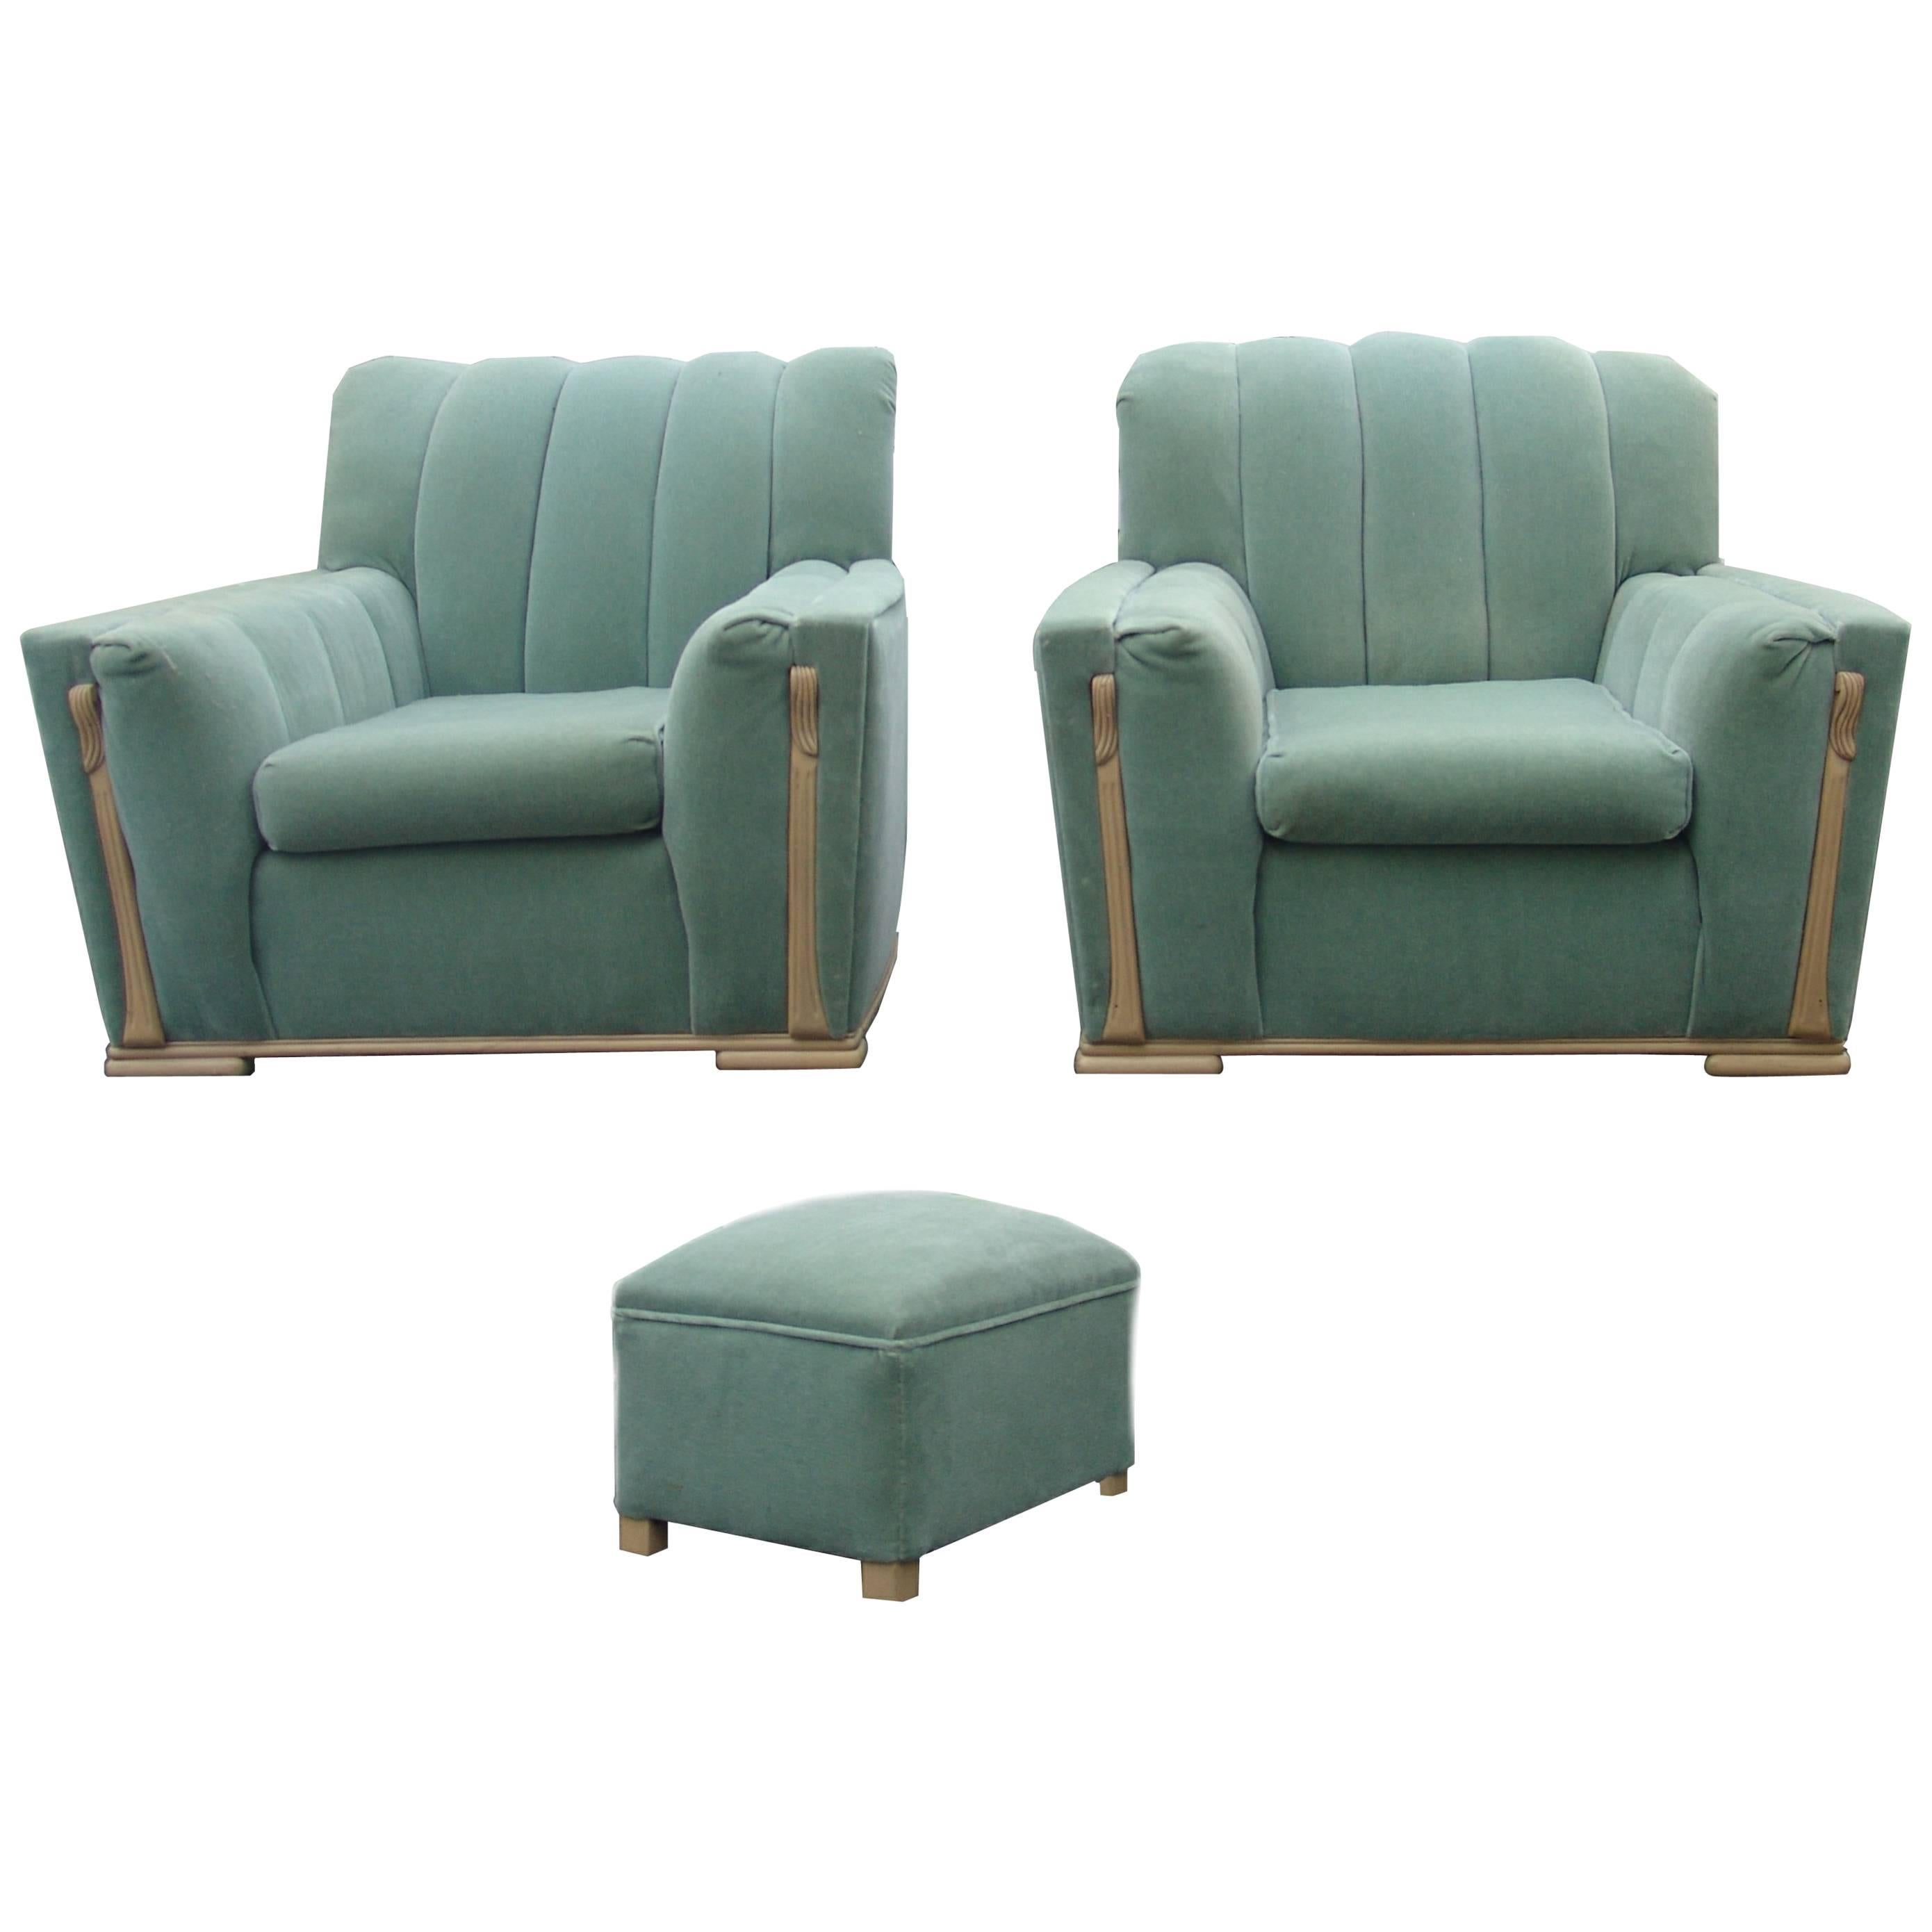 Pair or Art Deco Streamline Club Wood Trim Lounge Chairs and Ottoman